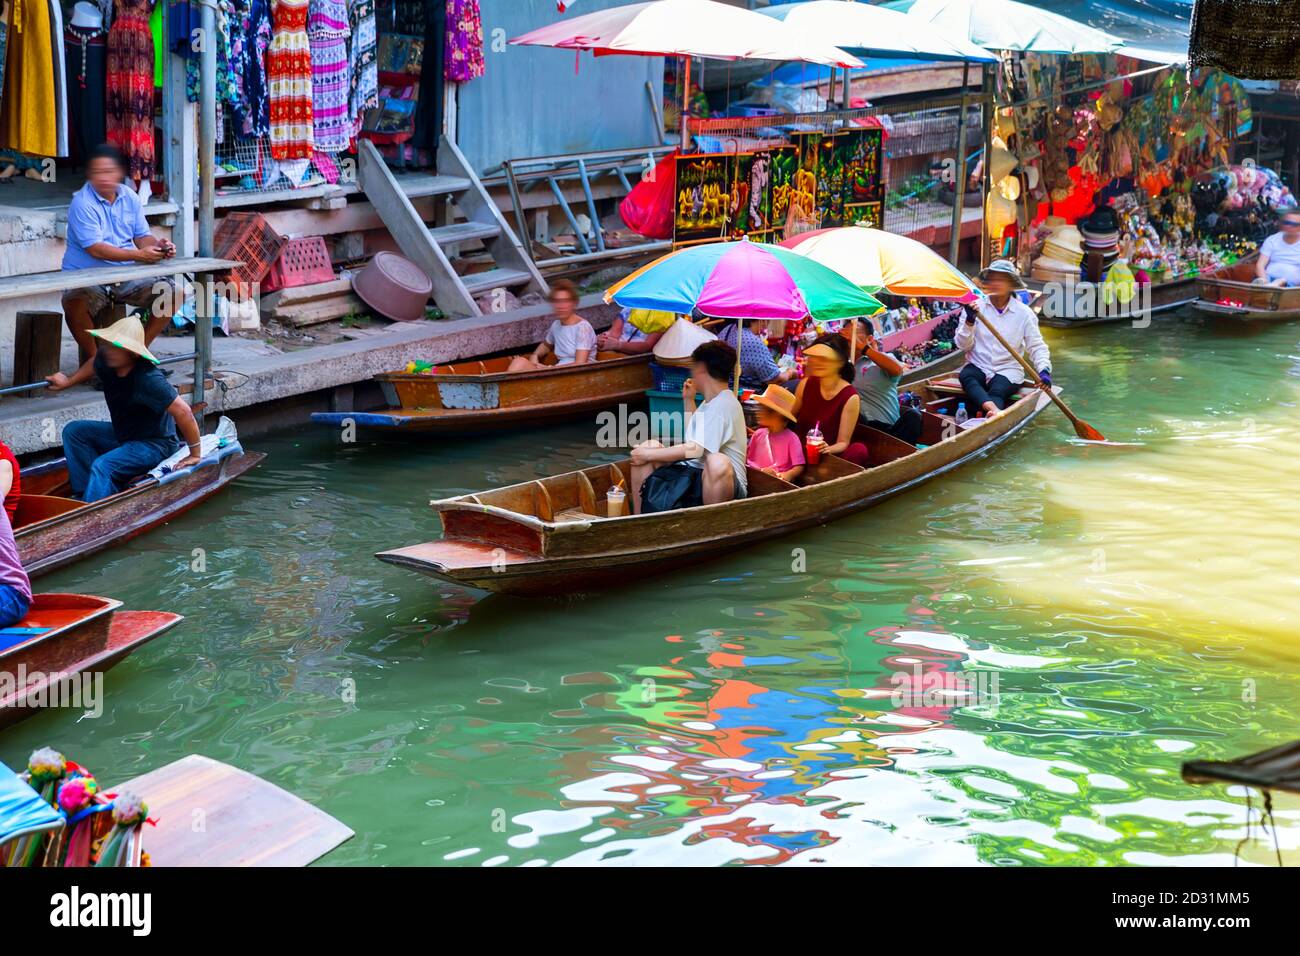 Traditional floating market in Damnoen Saduak near Bangkok, Thailand. The famous attractions of Ratchaburi province in Thailand. Stock Photo